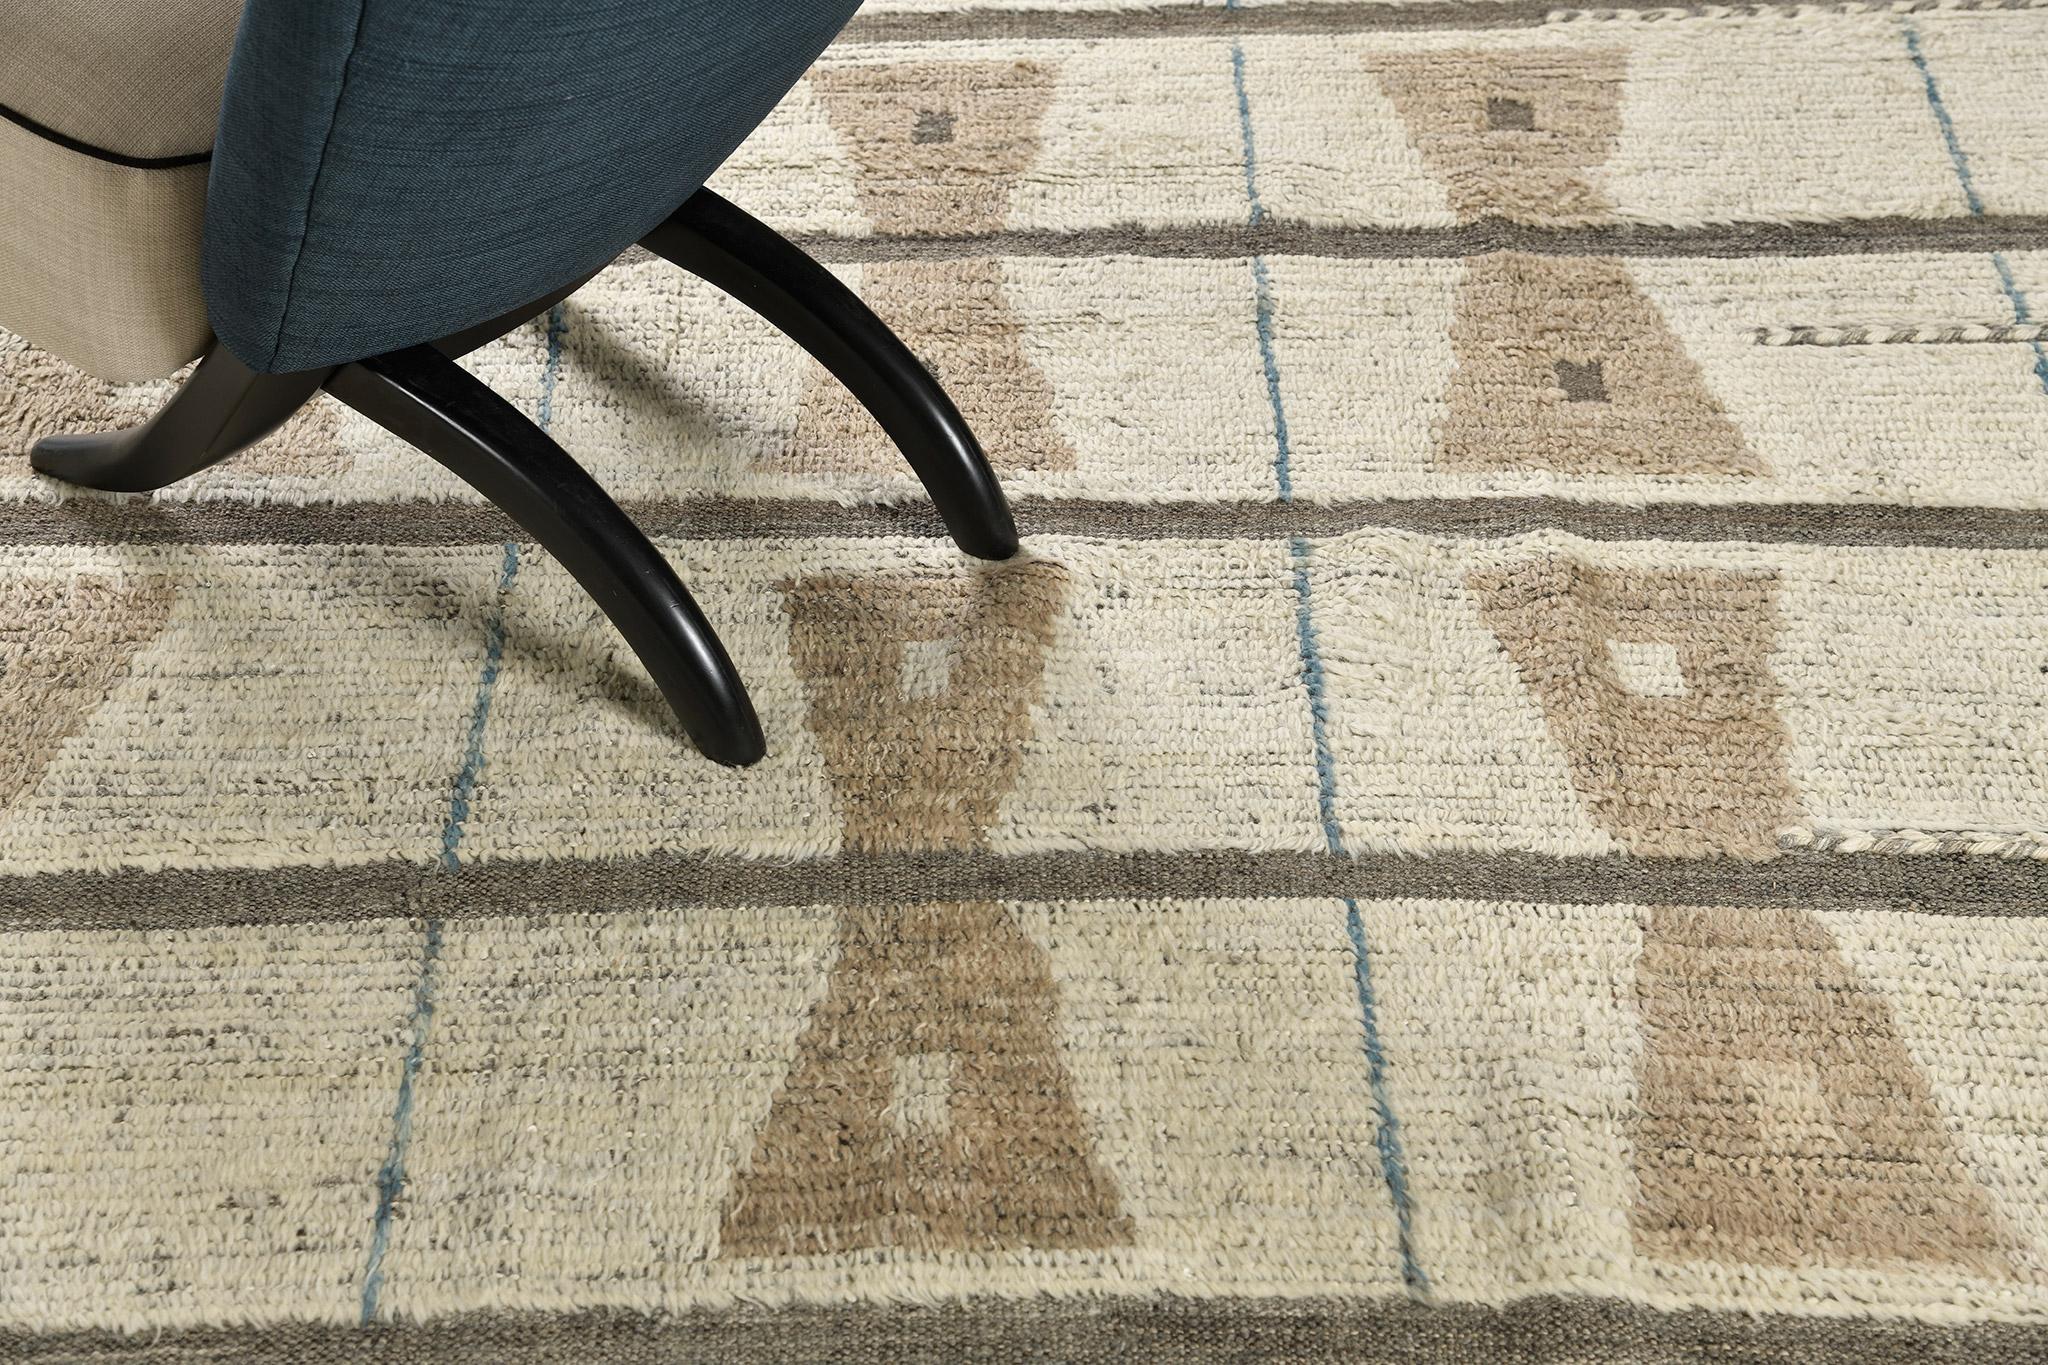 The 'Skane' rug is a handwoven wool piece inspired by vintage Scandinavian design elements and recreated for the modern design world. The repetitive grid creates balance and harmony, woven with a two-toned neutral color palette. This collection,